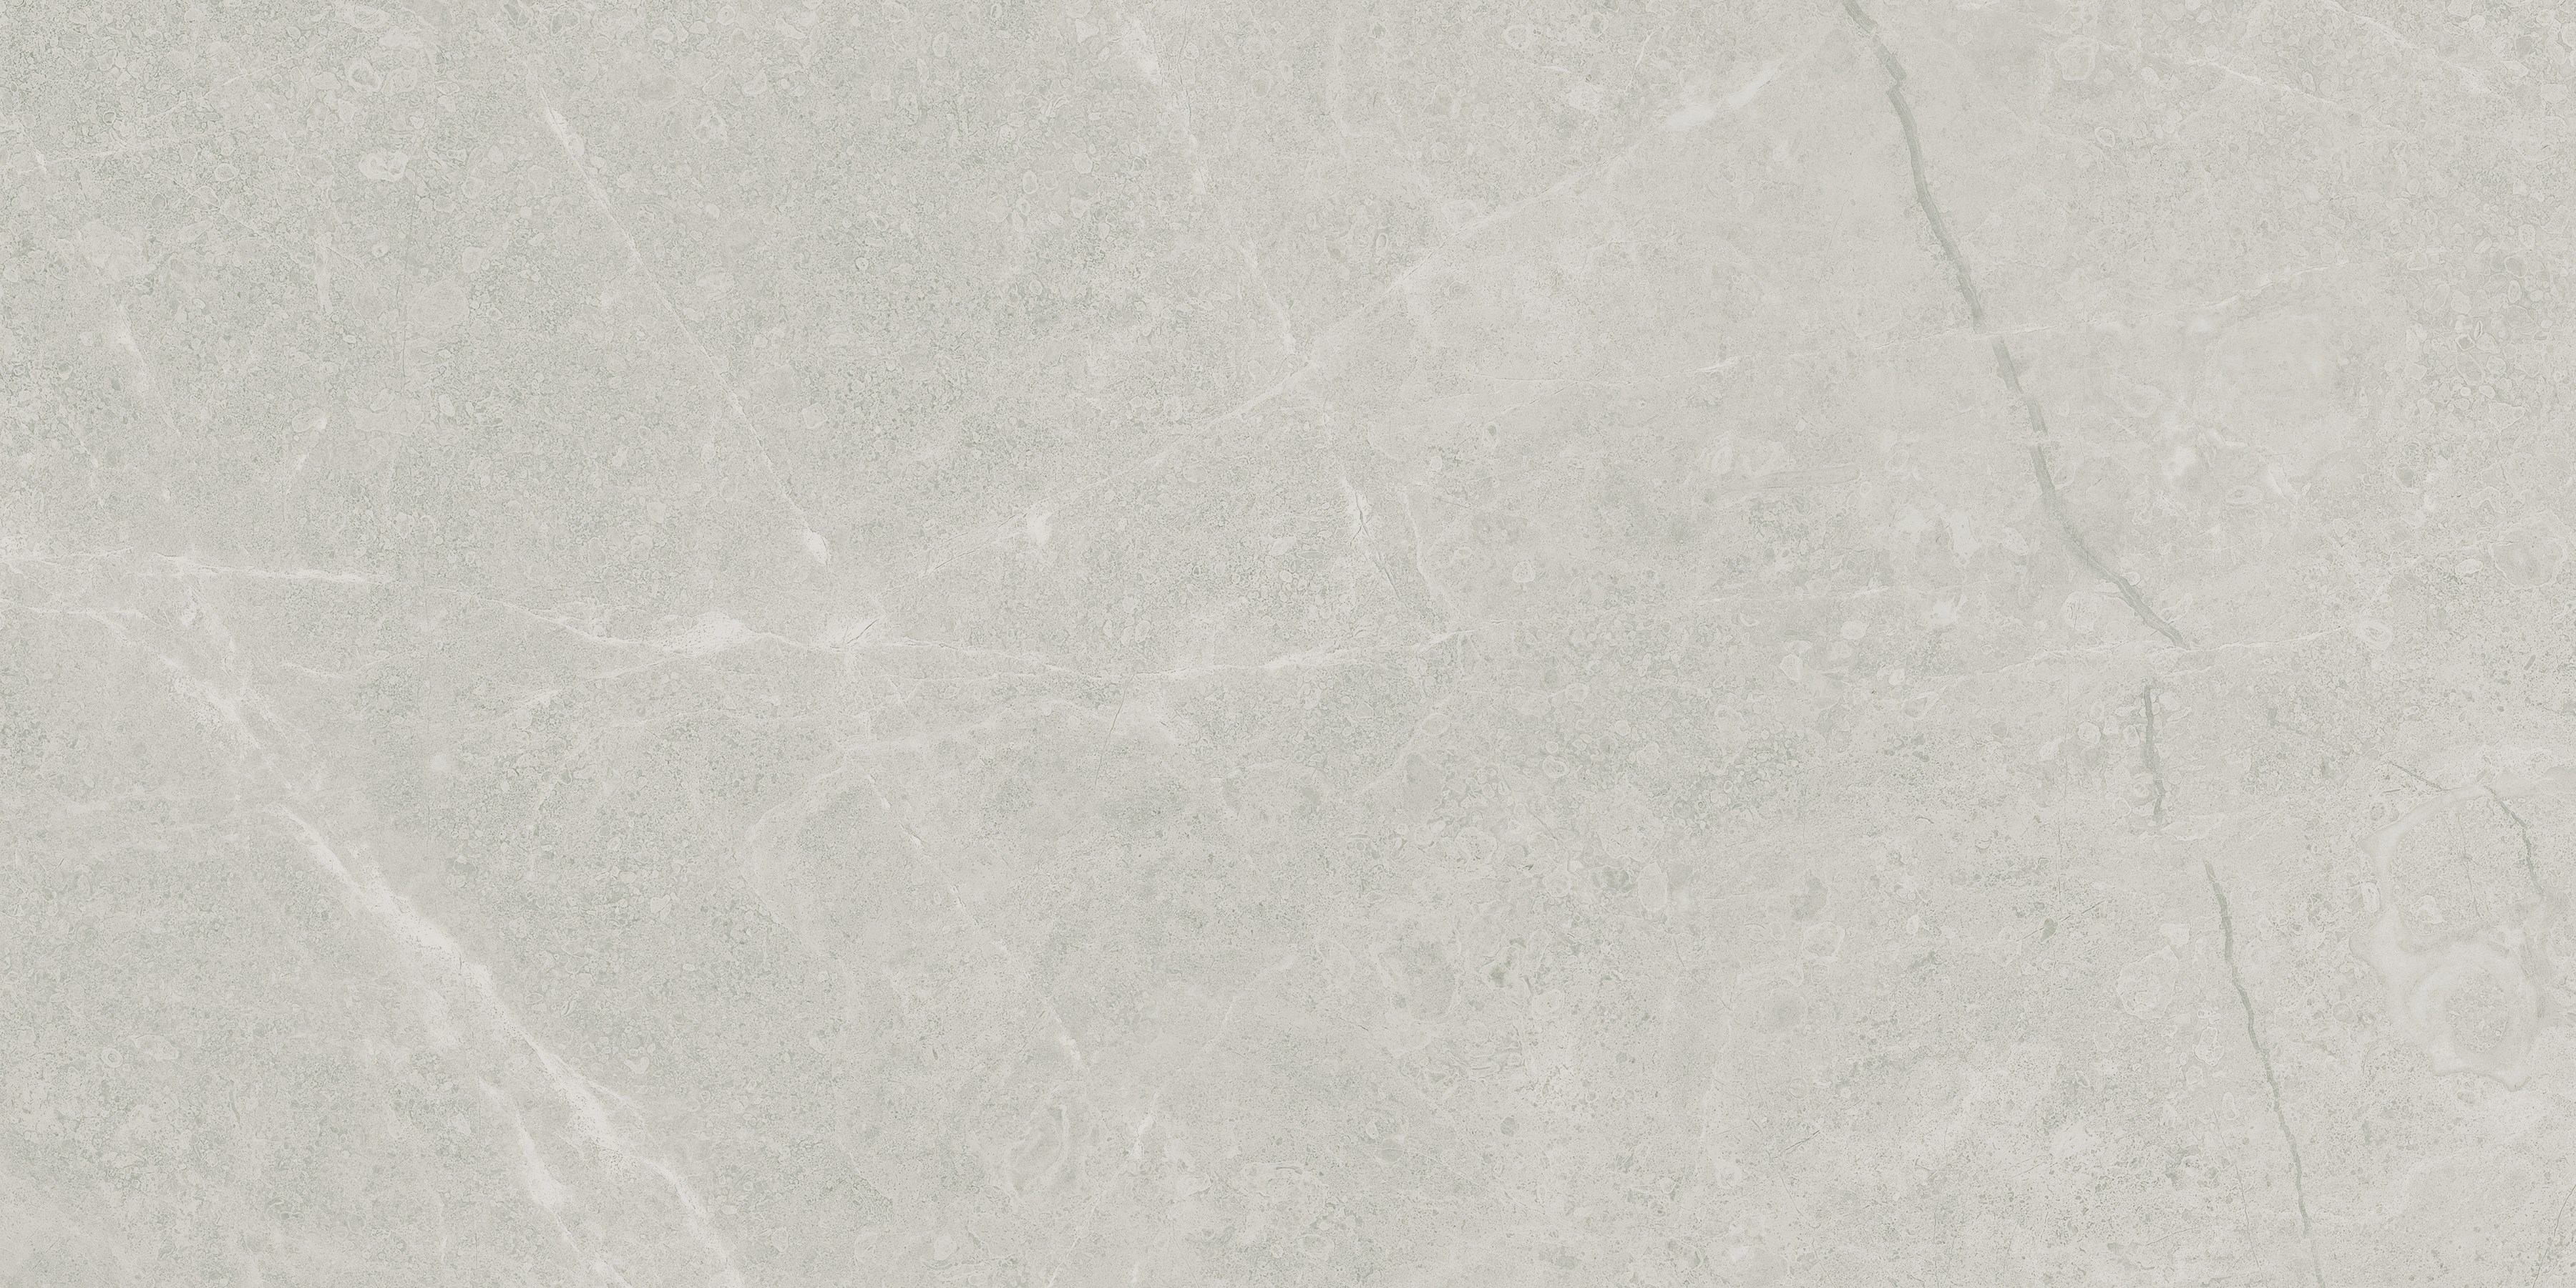 grigio pattern glazed porcelain field tile from torino anatolia collection distributed by surface group international matte finish pressed edge 12x24 rectangle shape